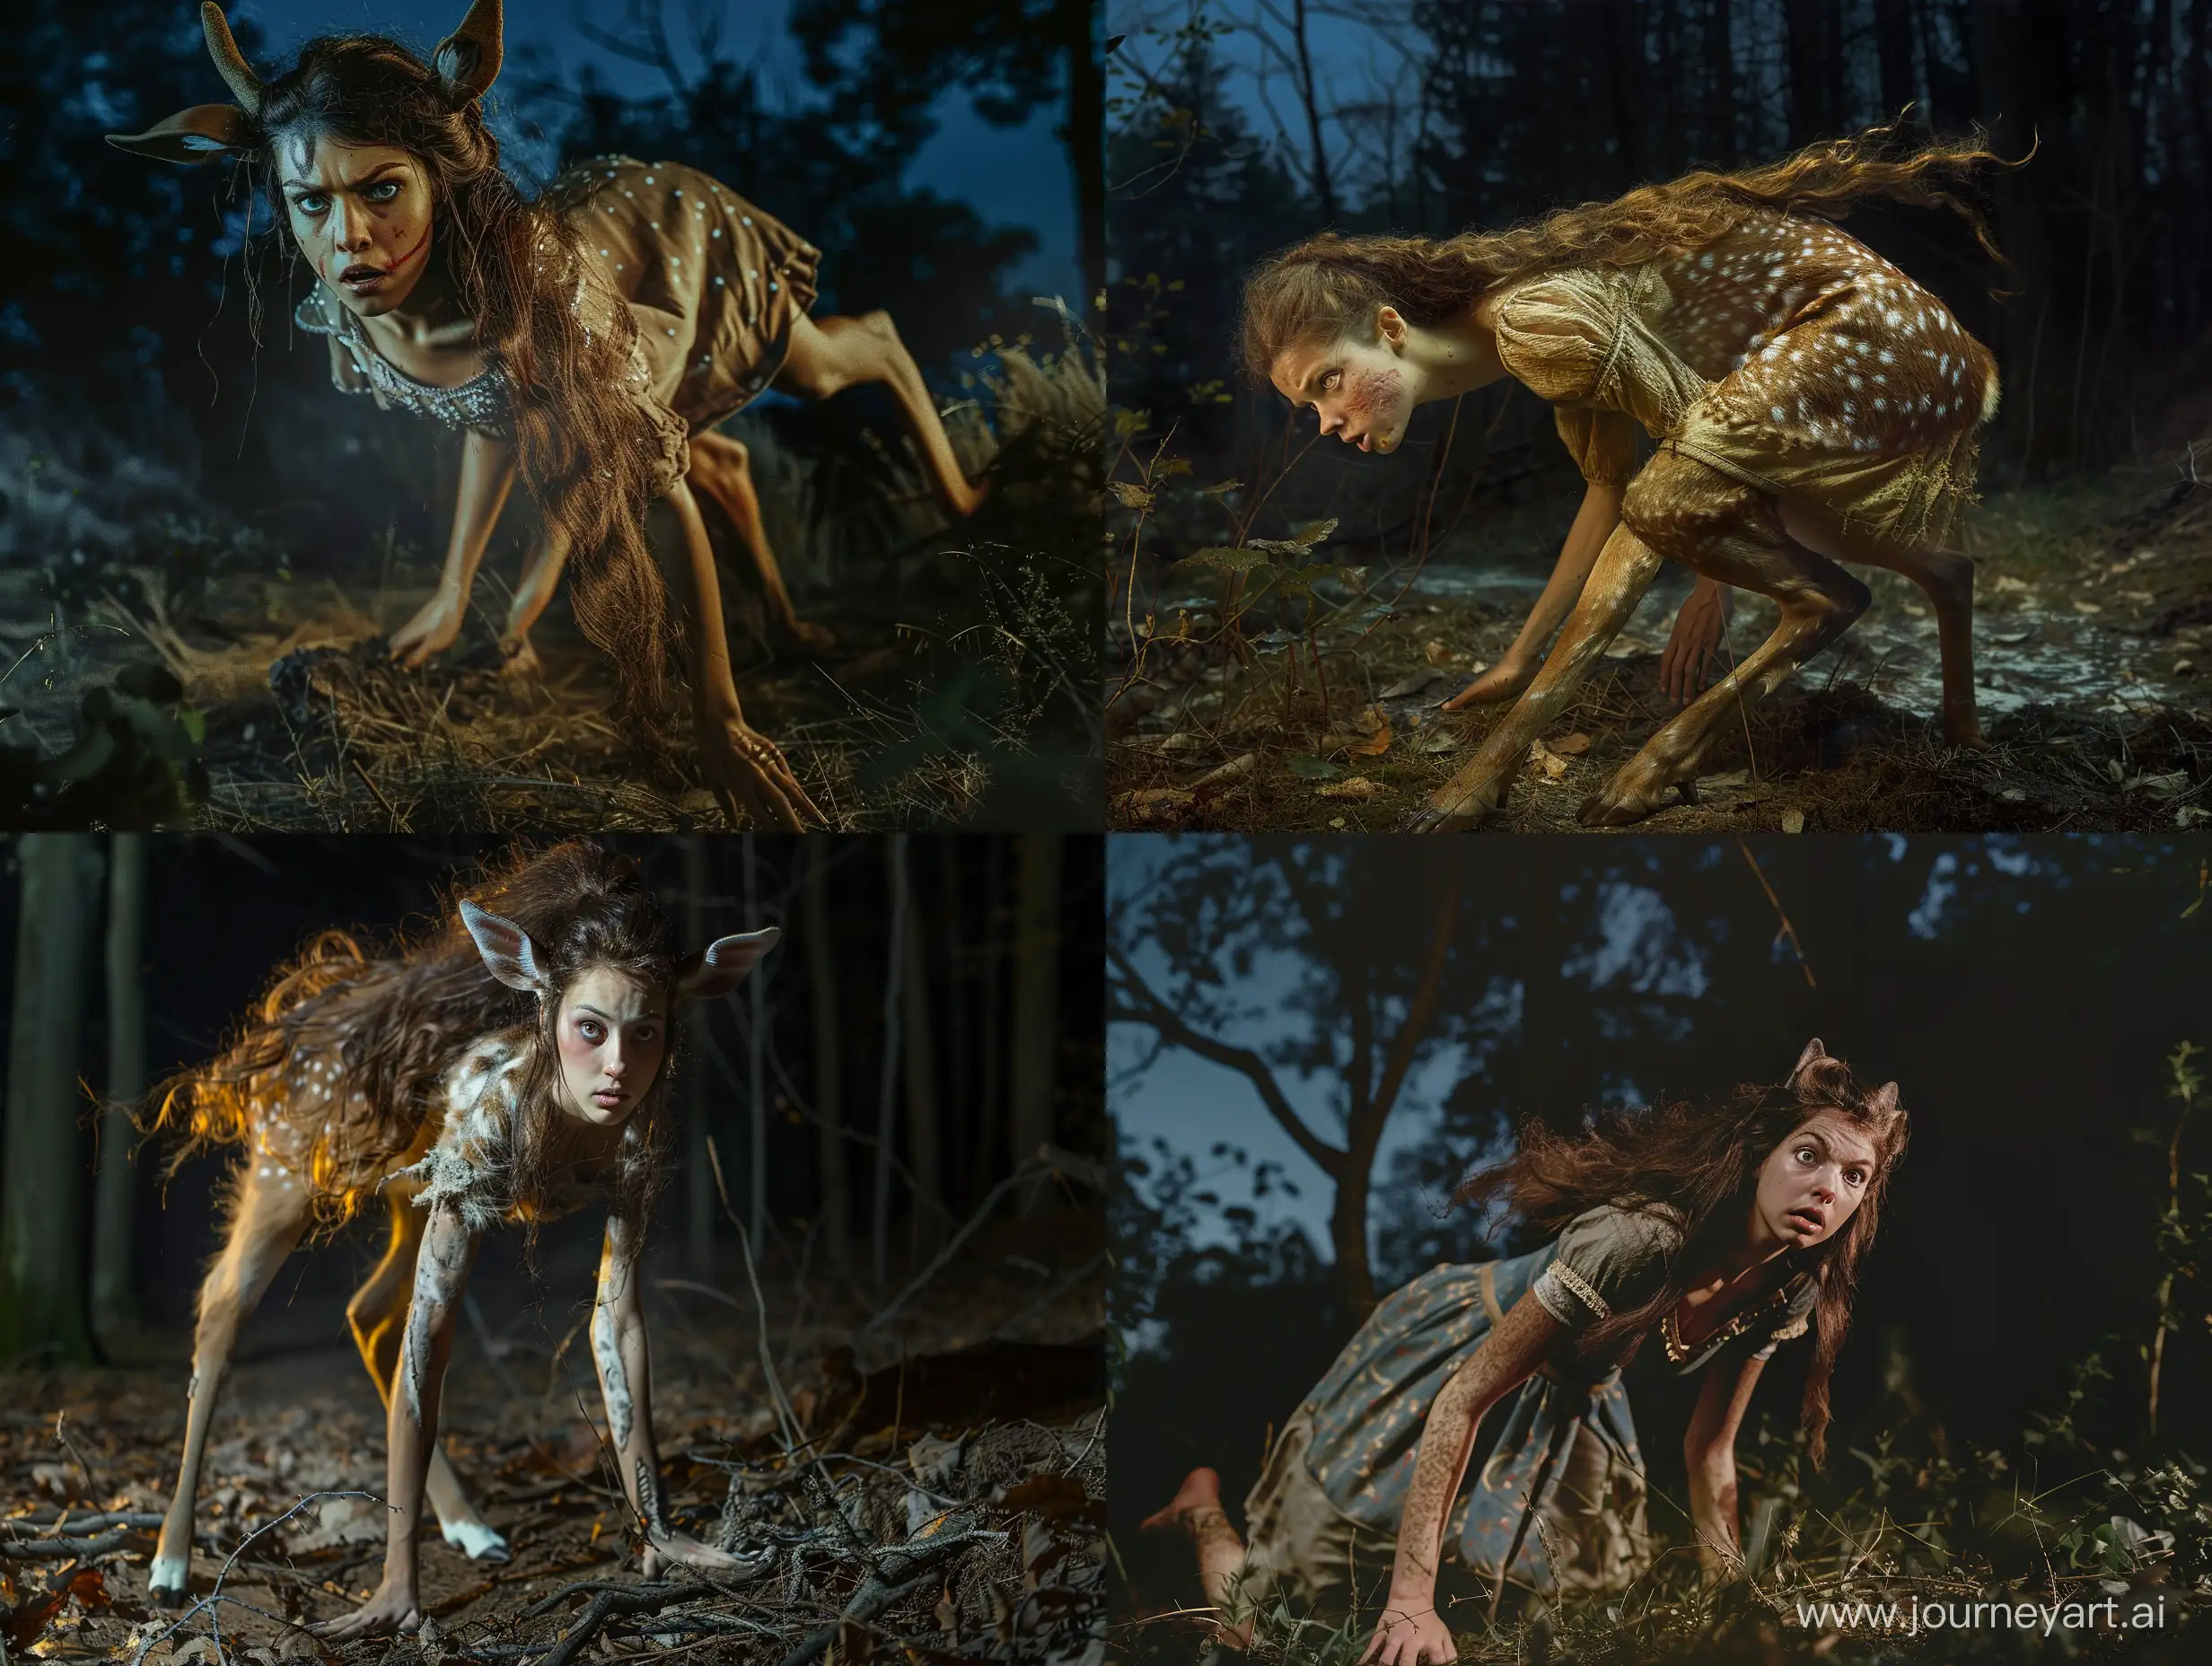 A photograph of a medieval princess with loose brown hair, who has been transformed into a deer. The photo is taken while the transformation is almost completed. She is standing on all fours in a forest at night. She has a desperate expression. Full body picture.